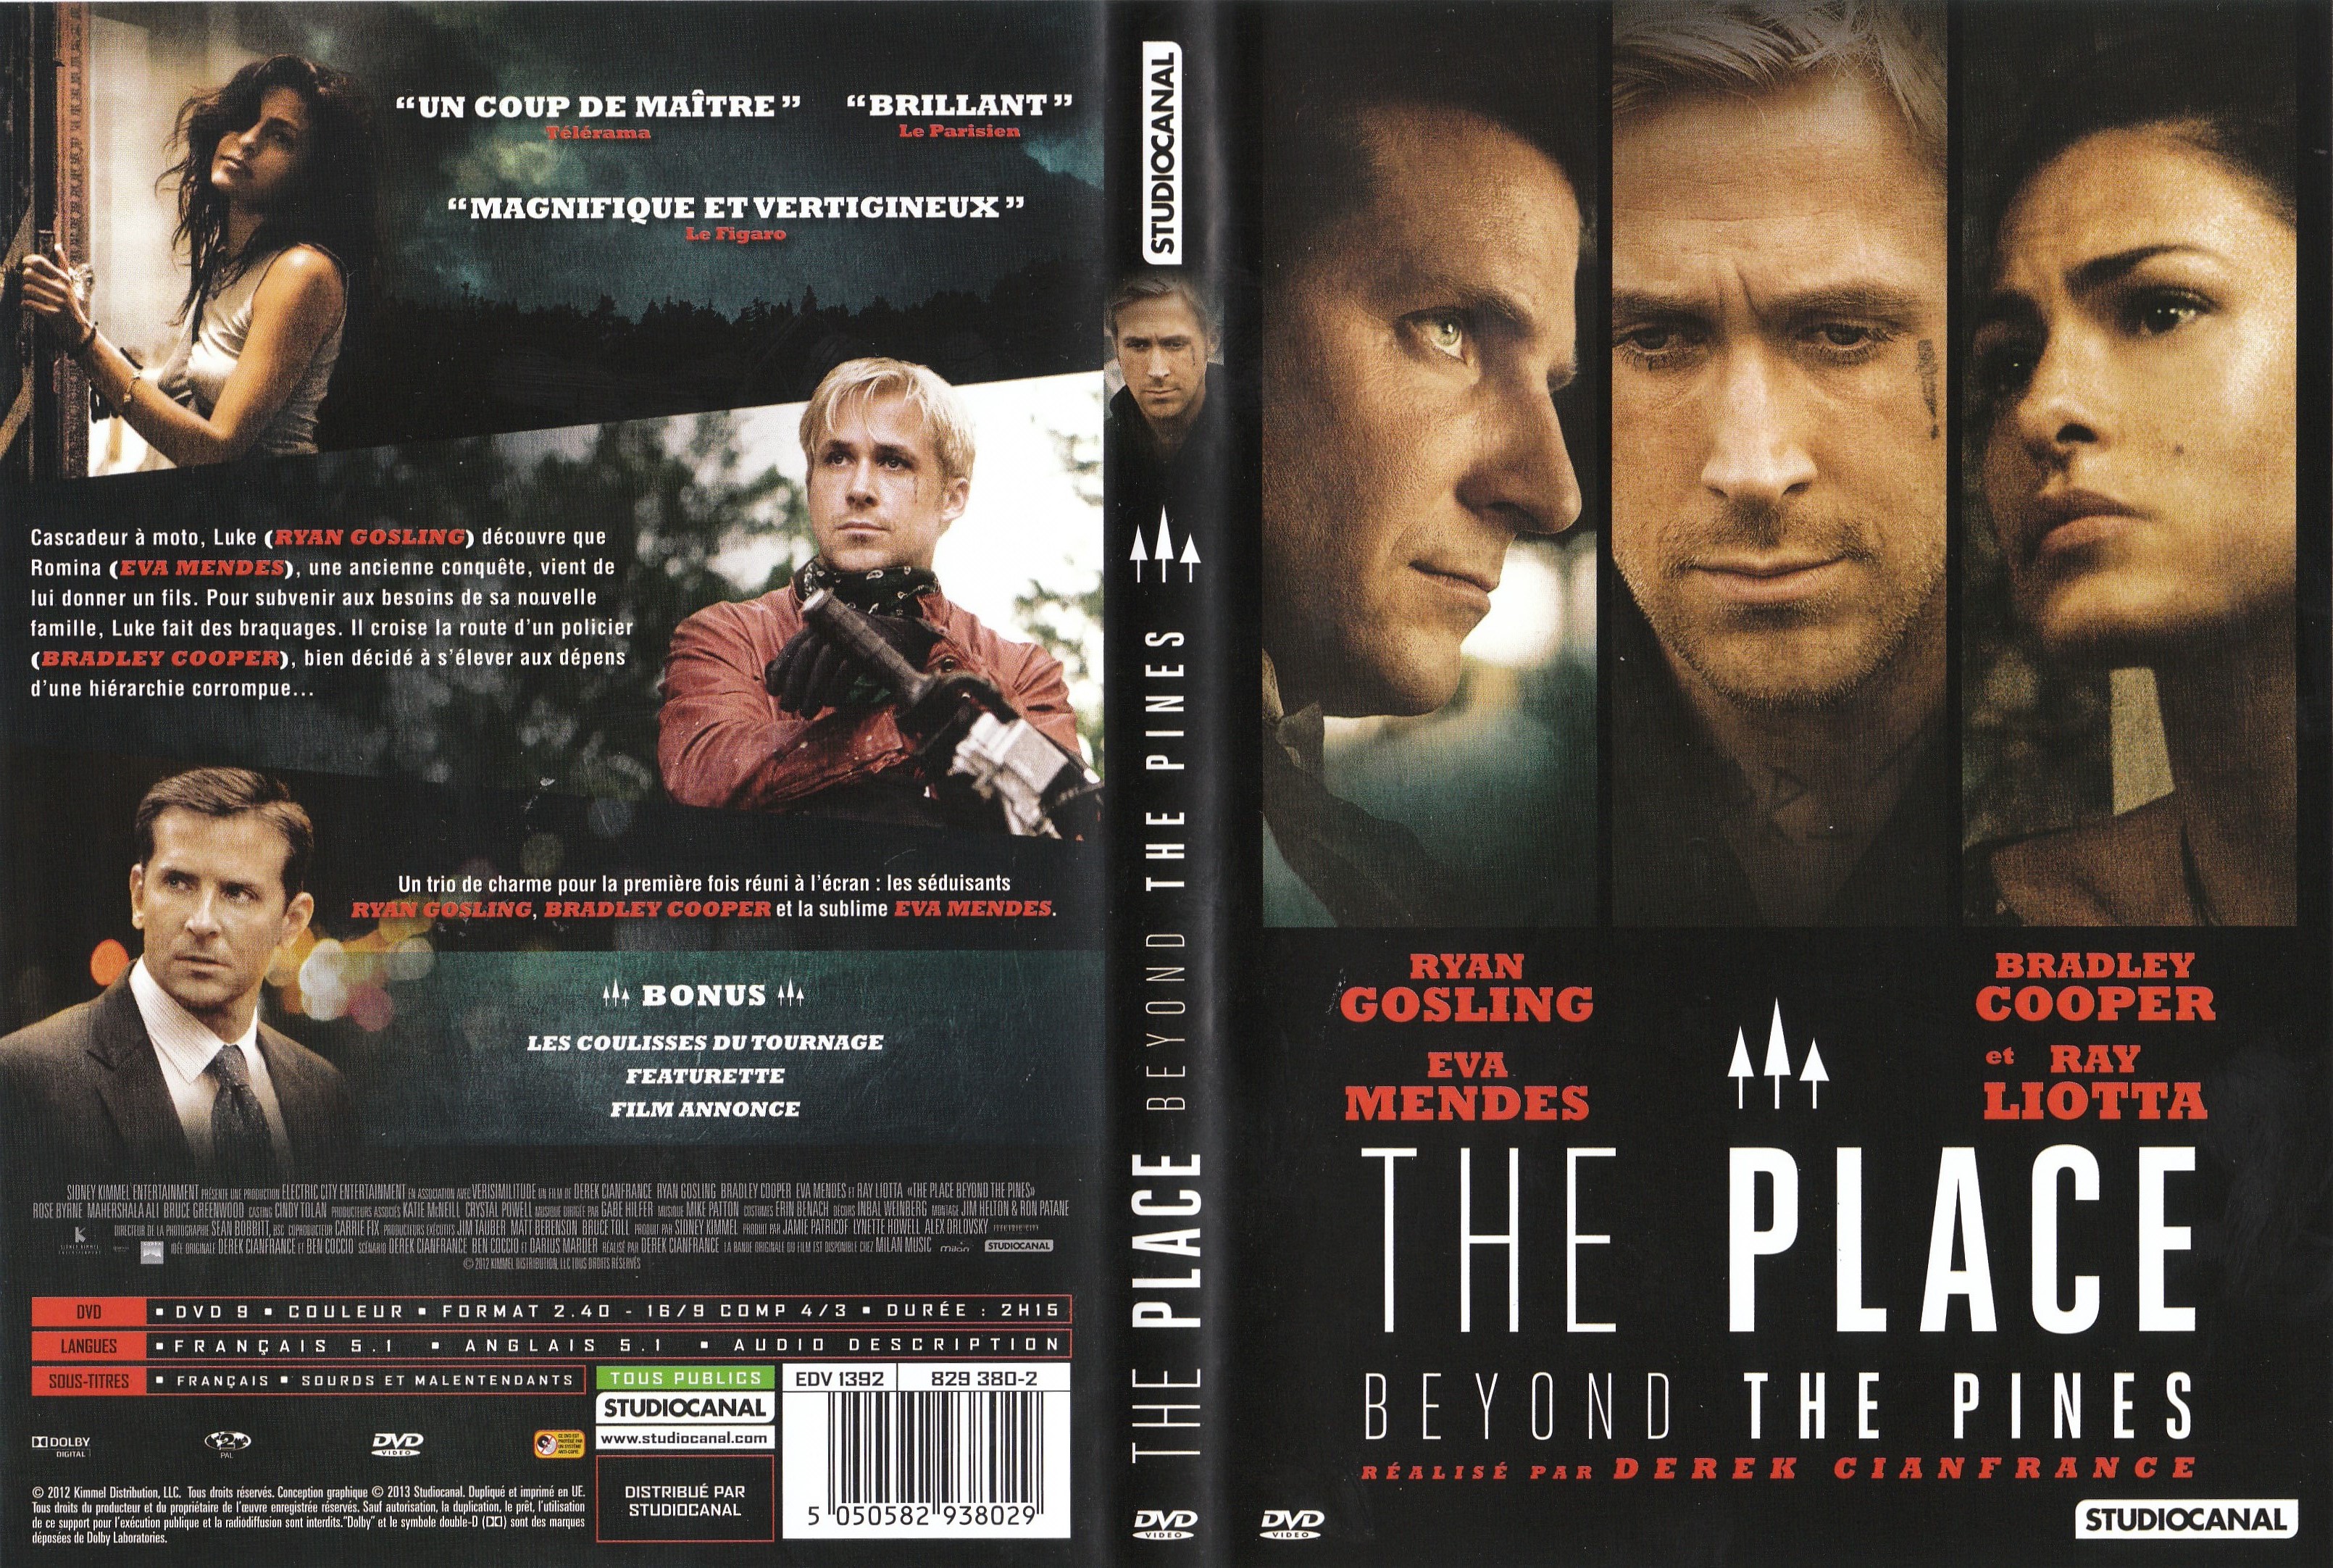 Jaquette DVD The place beyond the pines